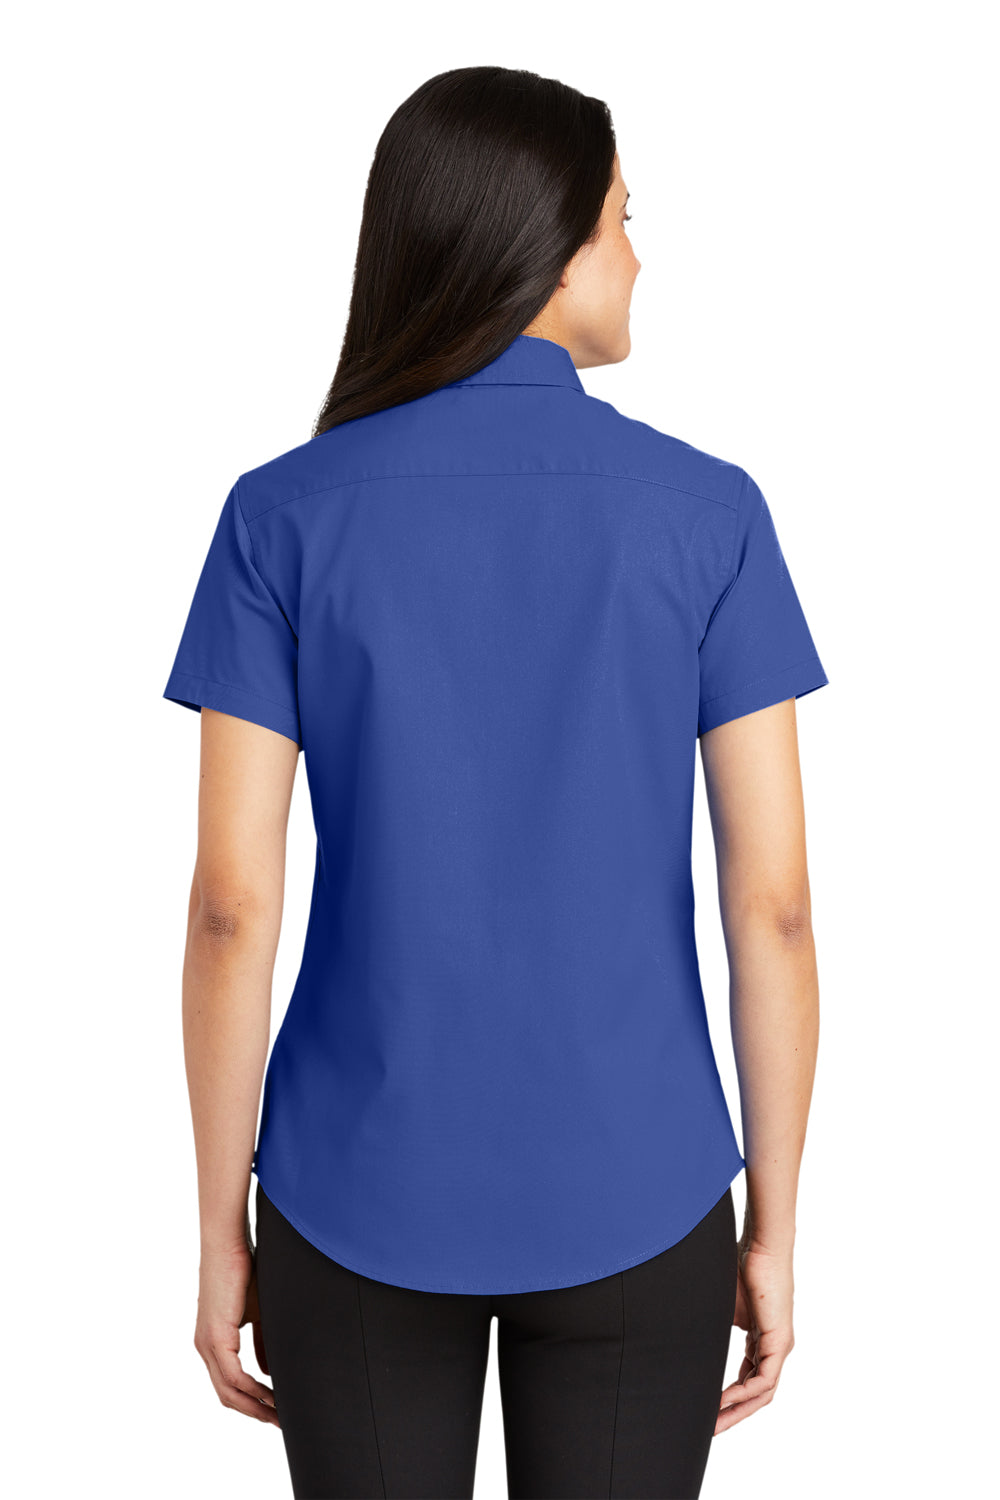 Port Authority L508 Womens Easy Care Wrinkle Resistant Short Sleeve Button Down Shirt Royal Blue Back